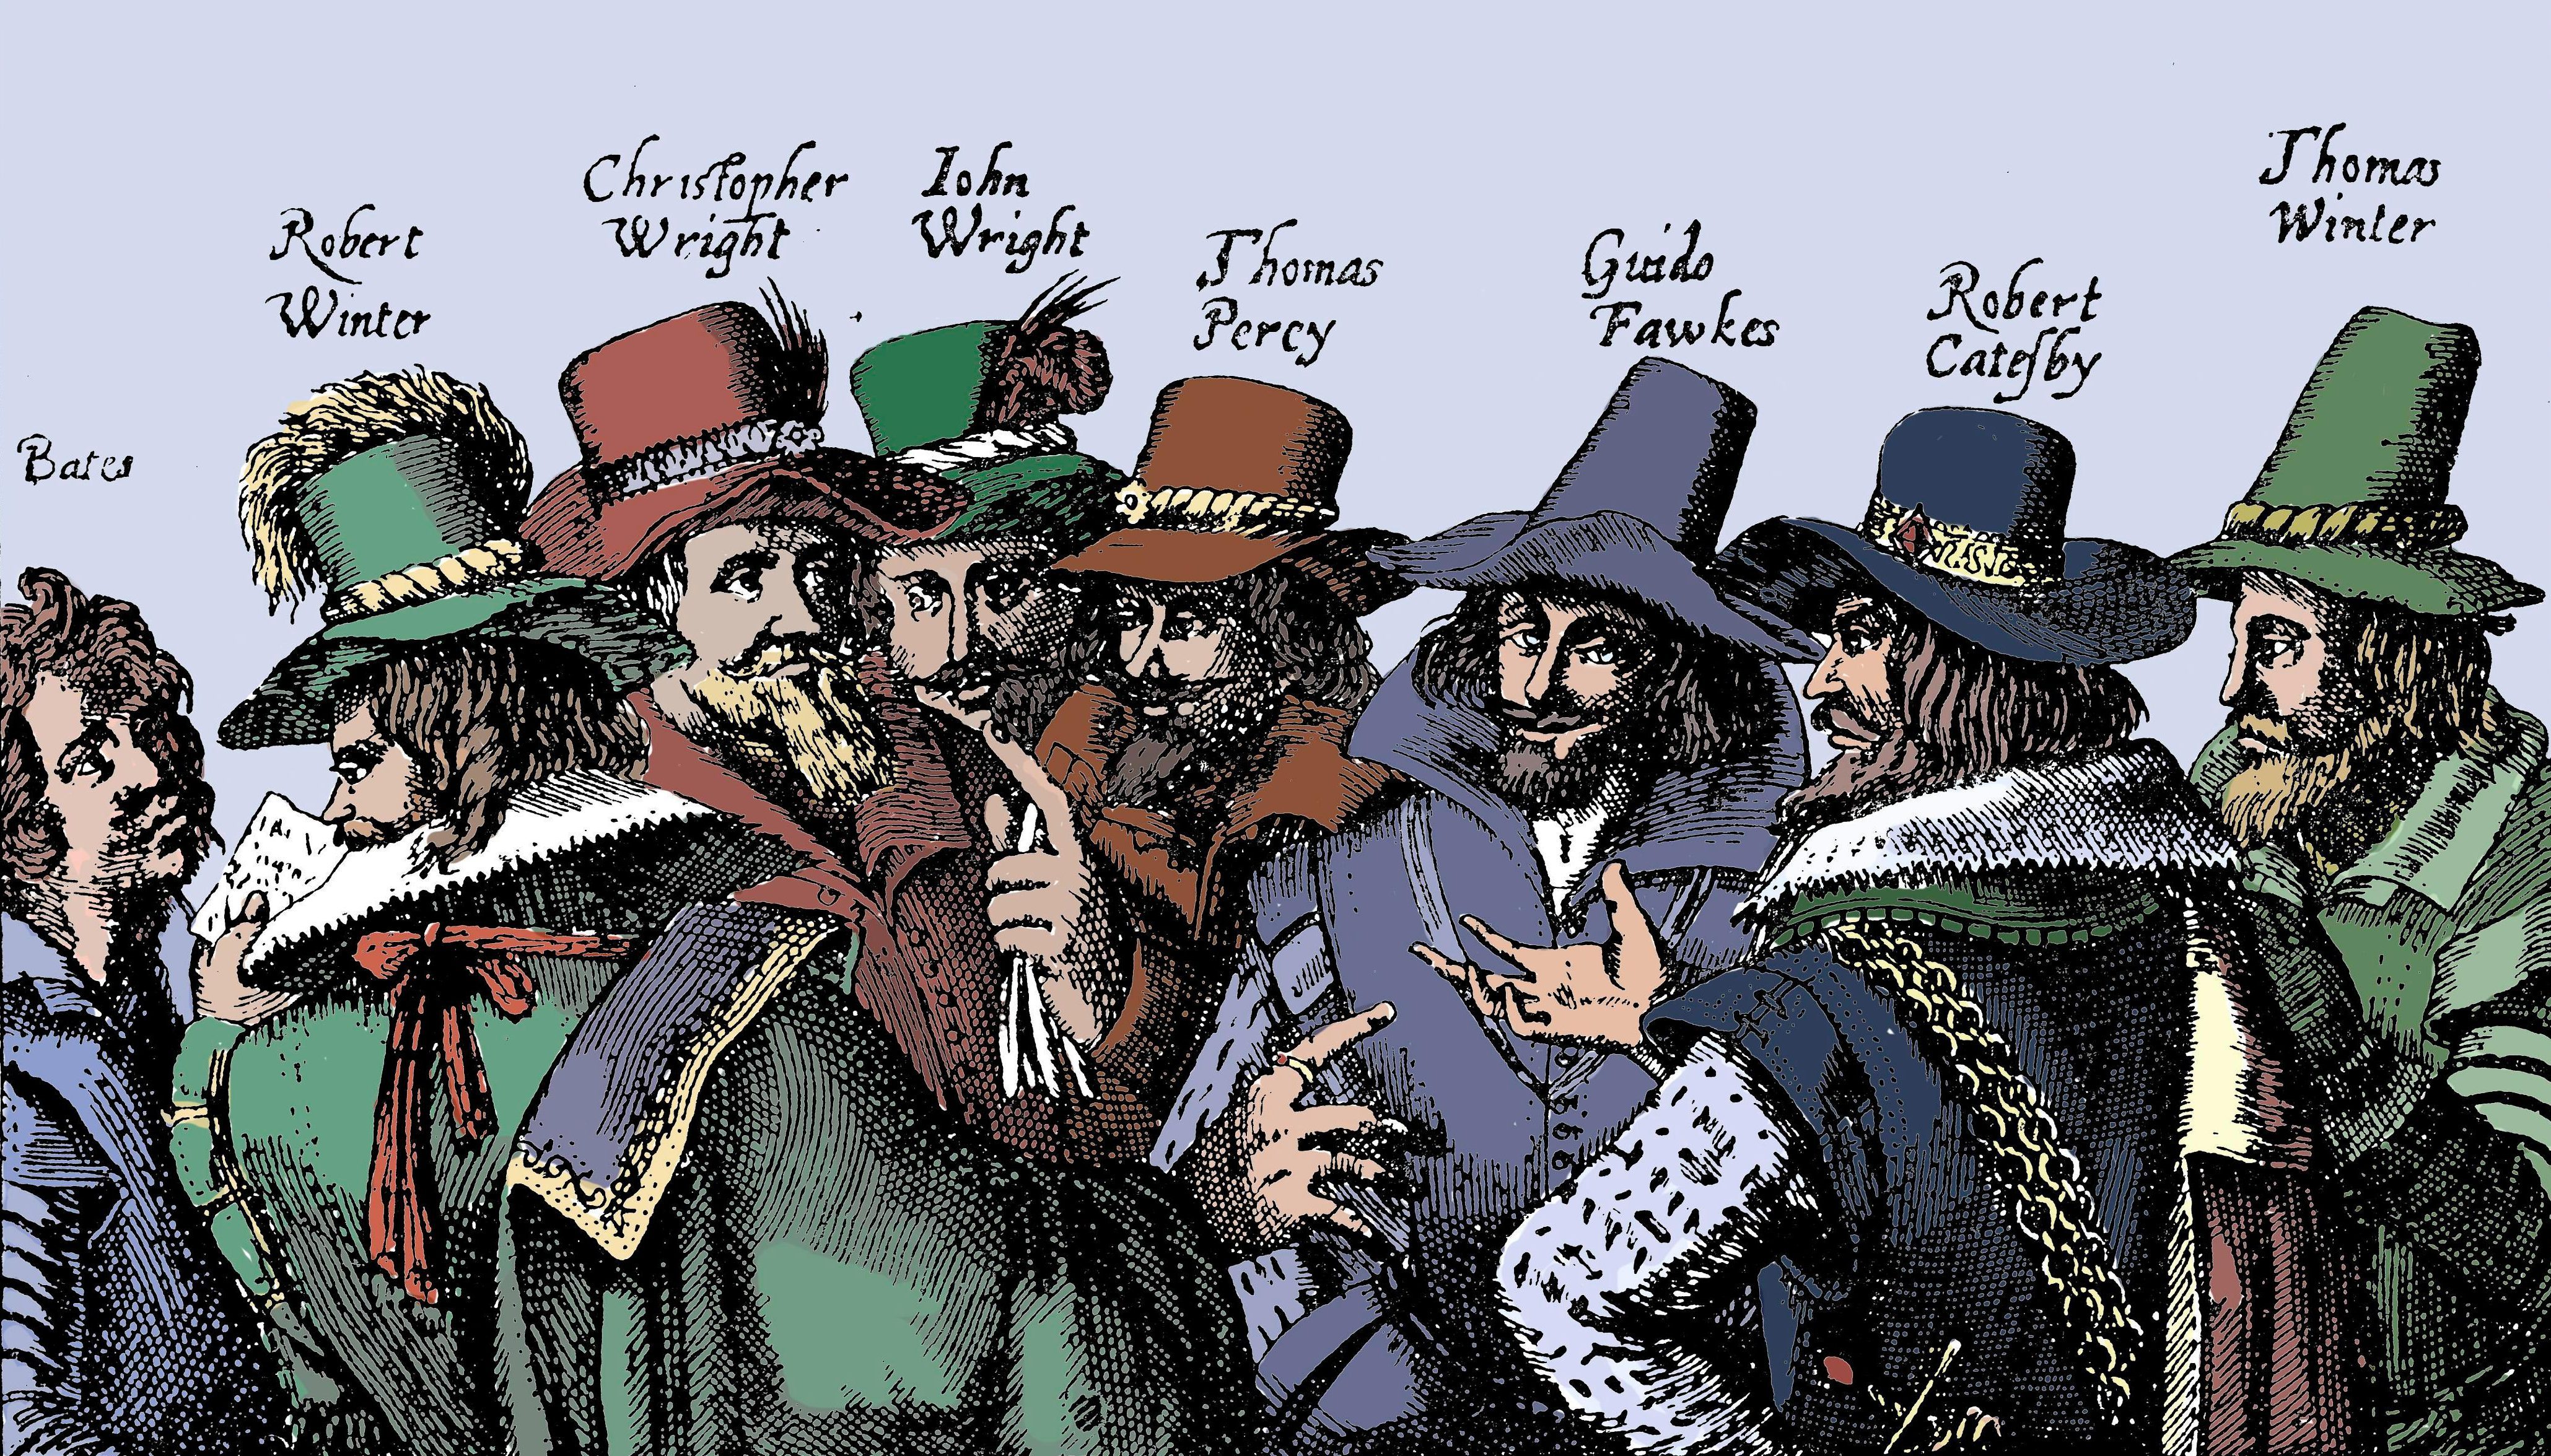 What was the gunpowder plot of 1605 and why did Guy Fawkes and Robert Catesby try to blow up Parliament?